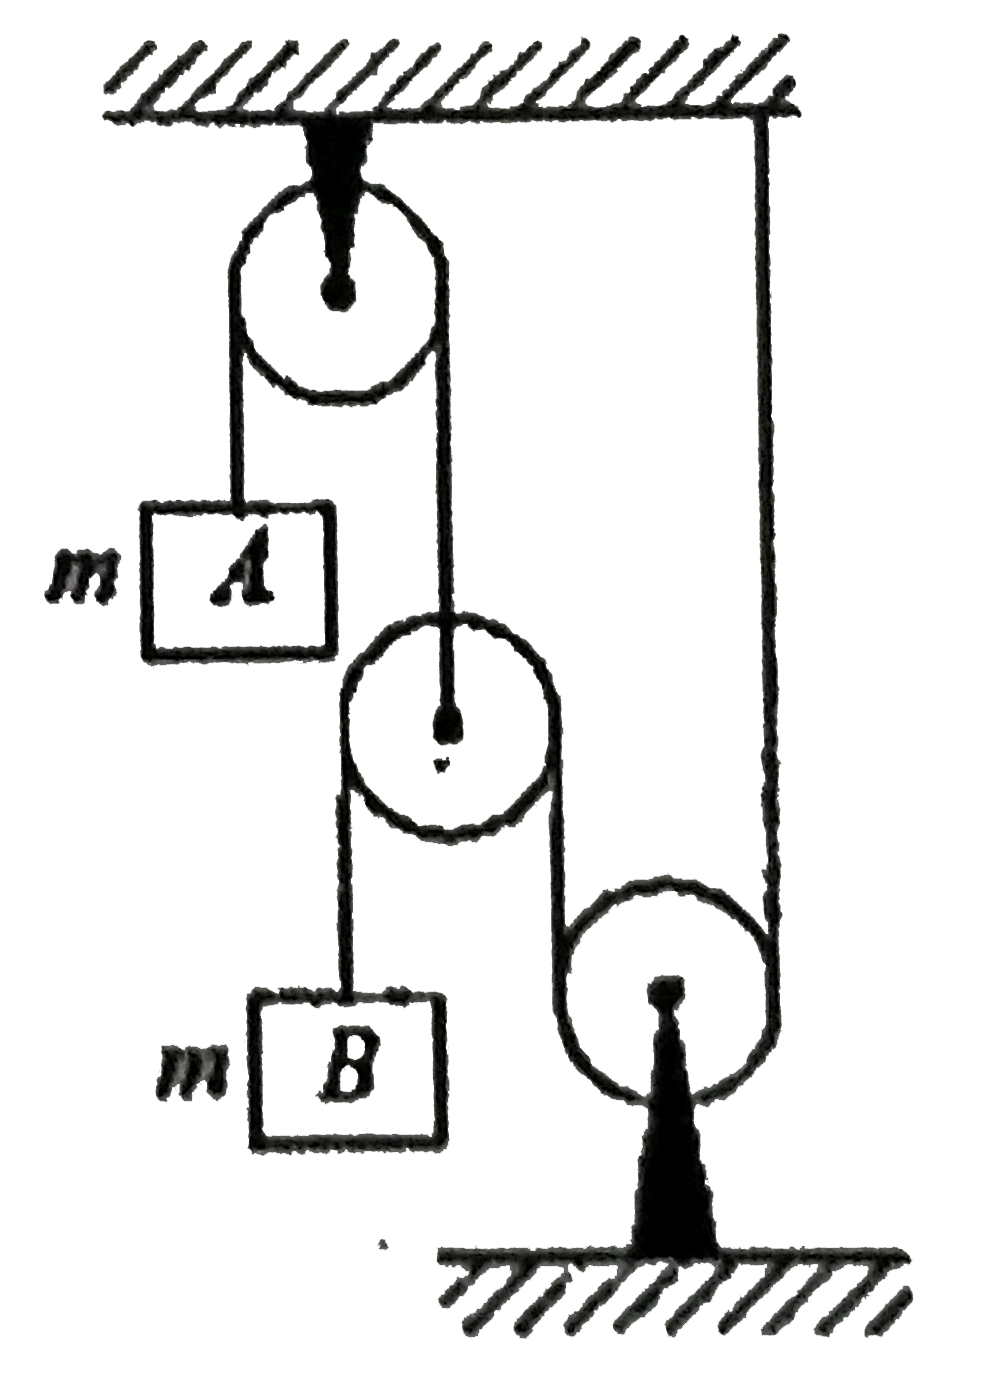 In the arrangement shown, the pulleys are smooth and the strings are inextensible. The acceleration of block B is :